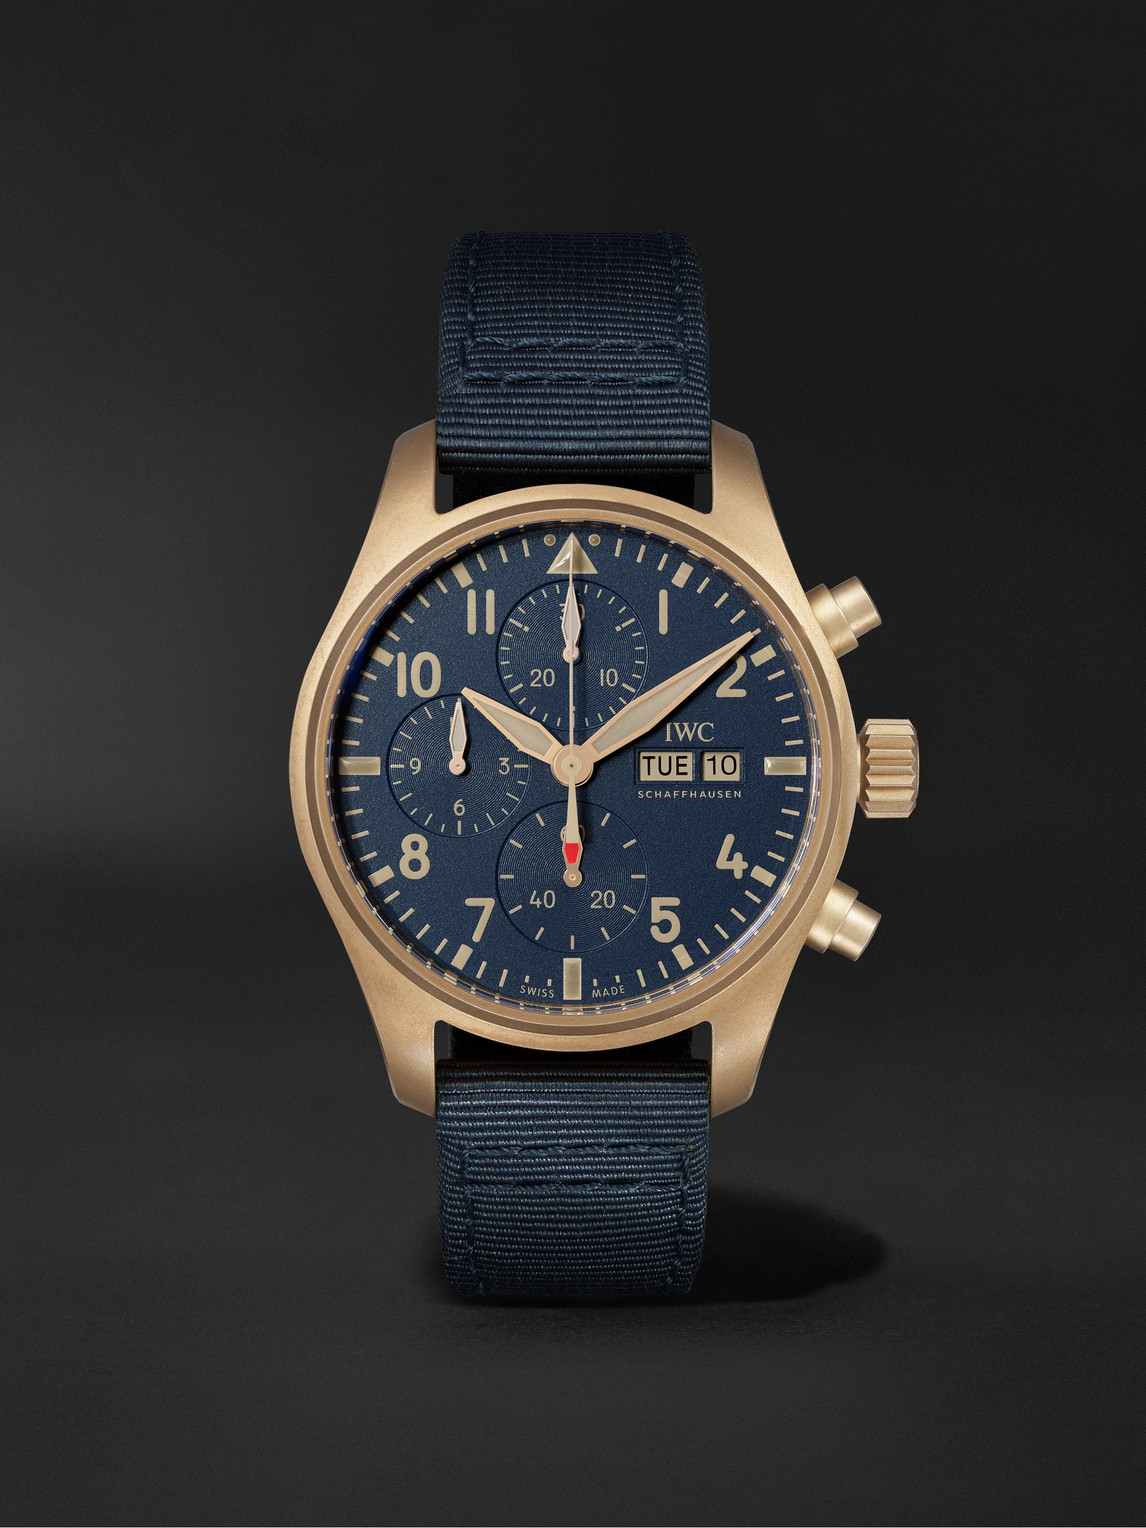 Iwc Schaffhausen Pilot's Automatic Chronograph 41mm Bronze And Textile Watch, Ref. No. Iw388109 In Blue